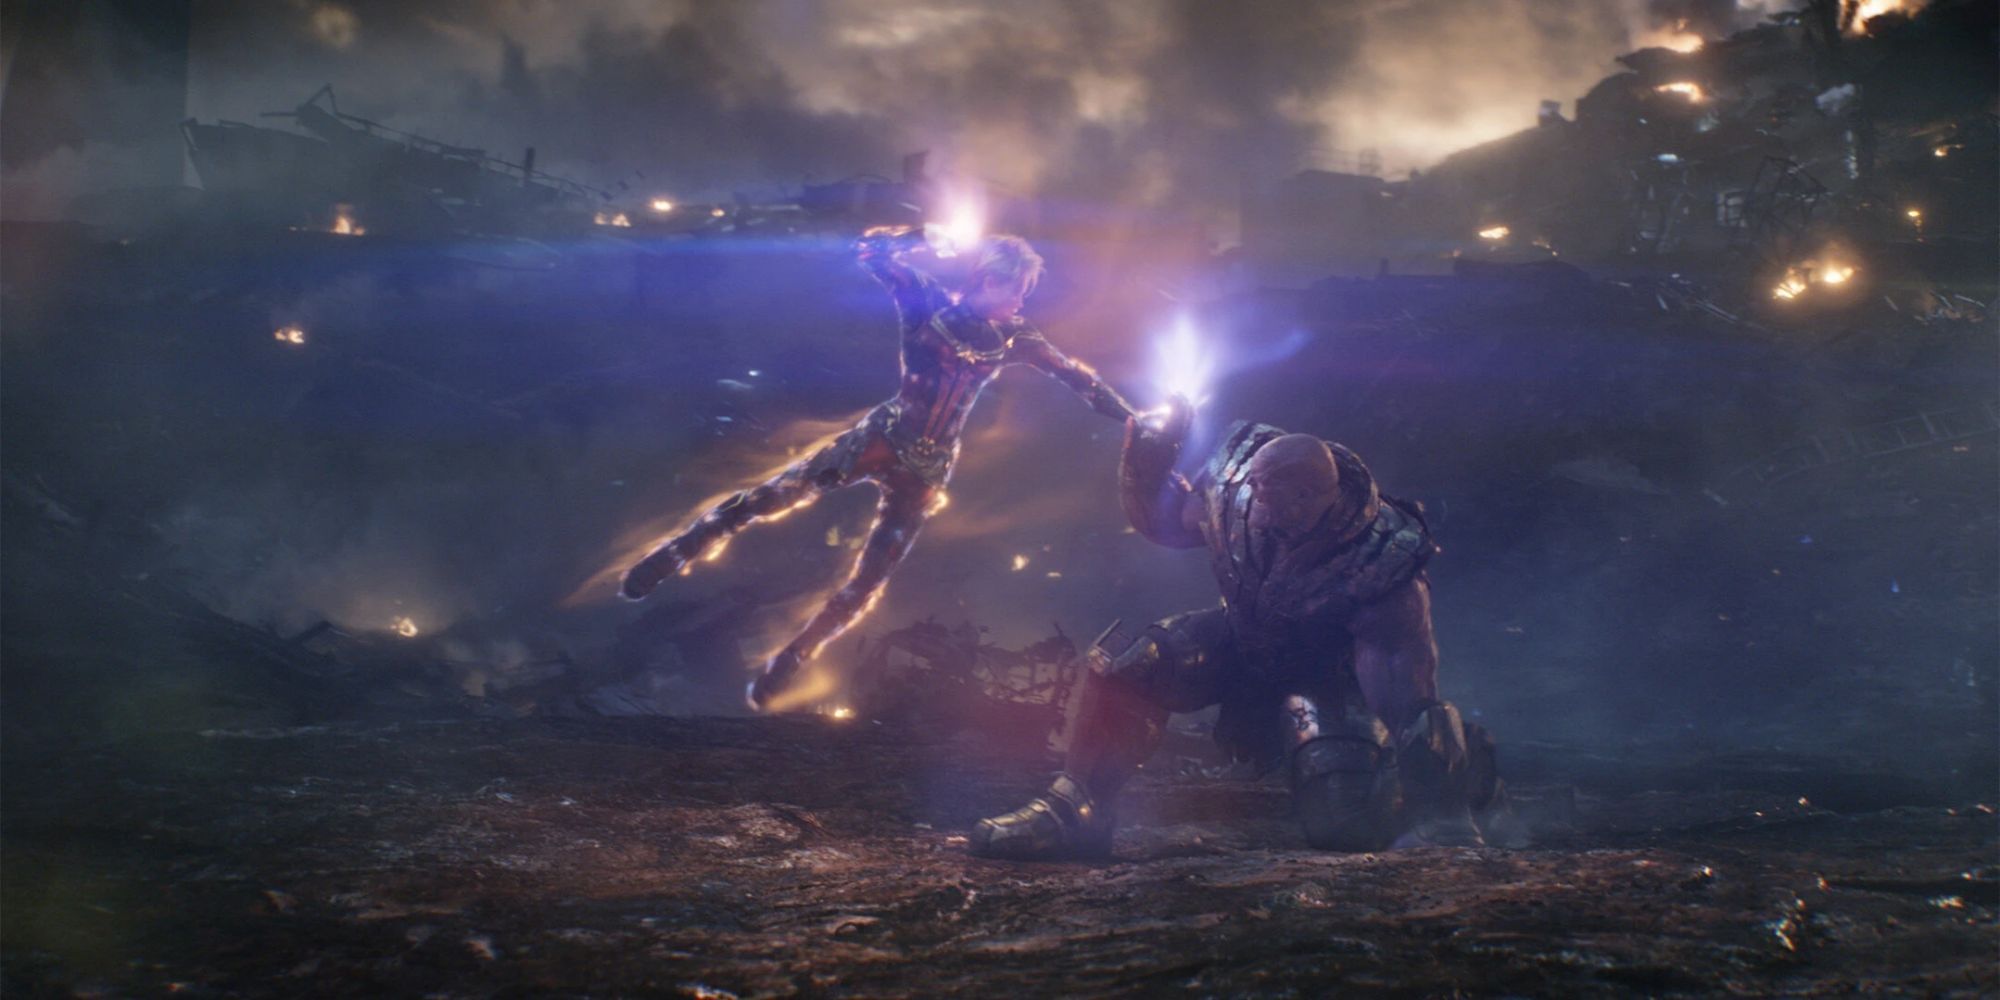 Captain Marvel hovers above Thanos on the battlefield preparing a punch